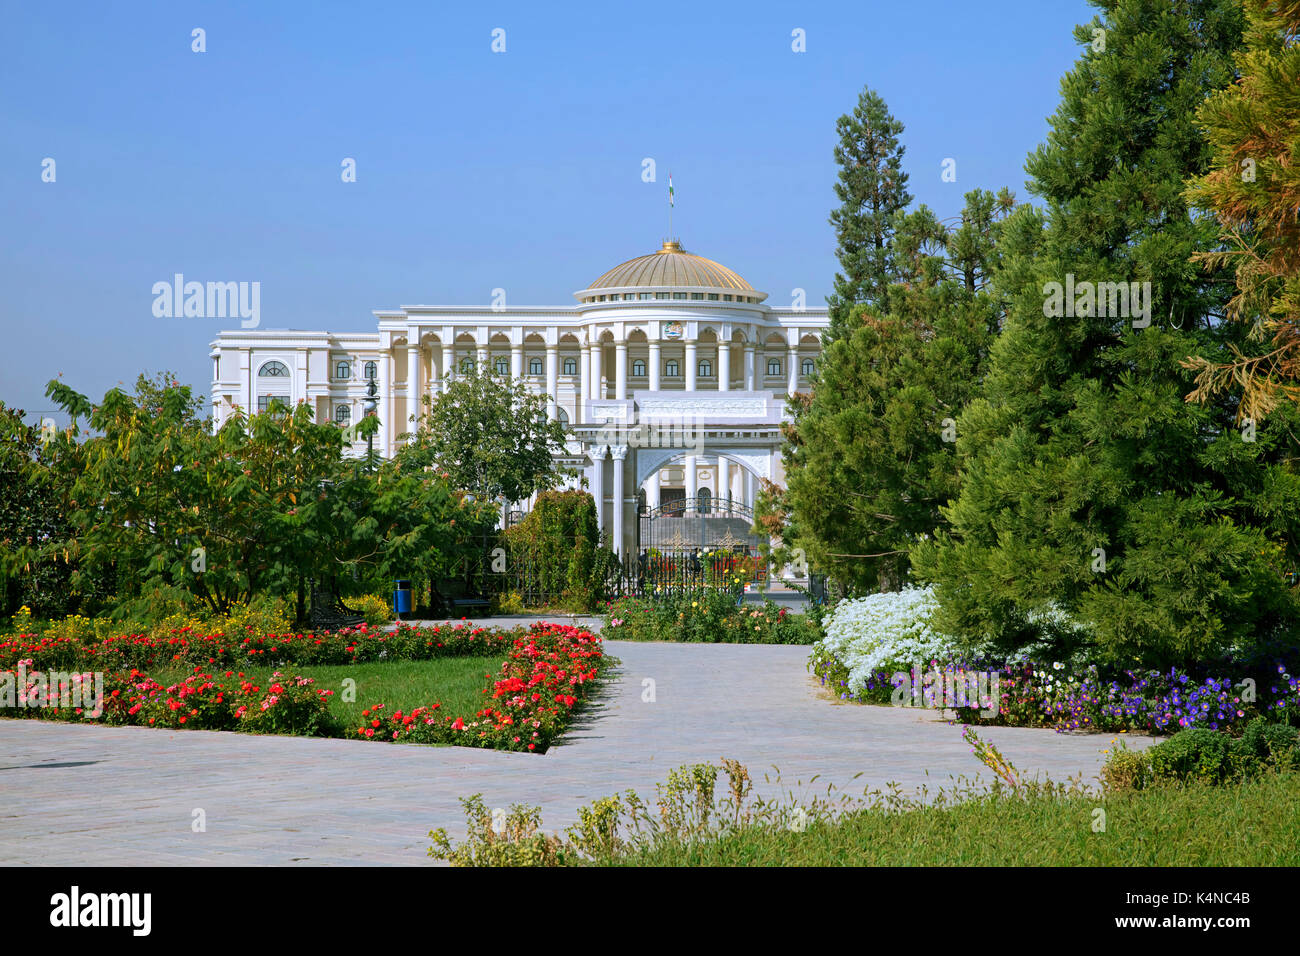 Presidential Palace / Palace of Nations / White House and the Rudaki Park in Dushanbe, Tajikistan Stock Photo